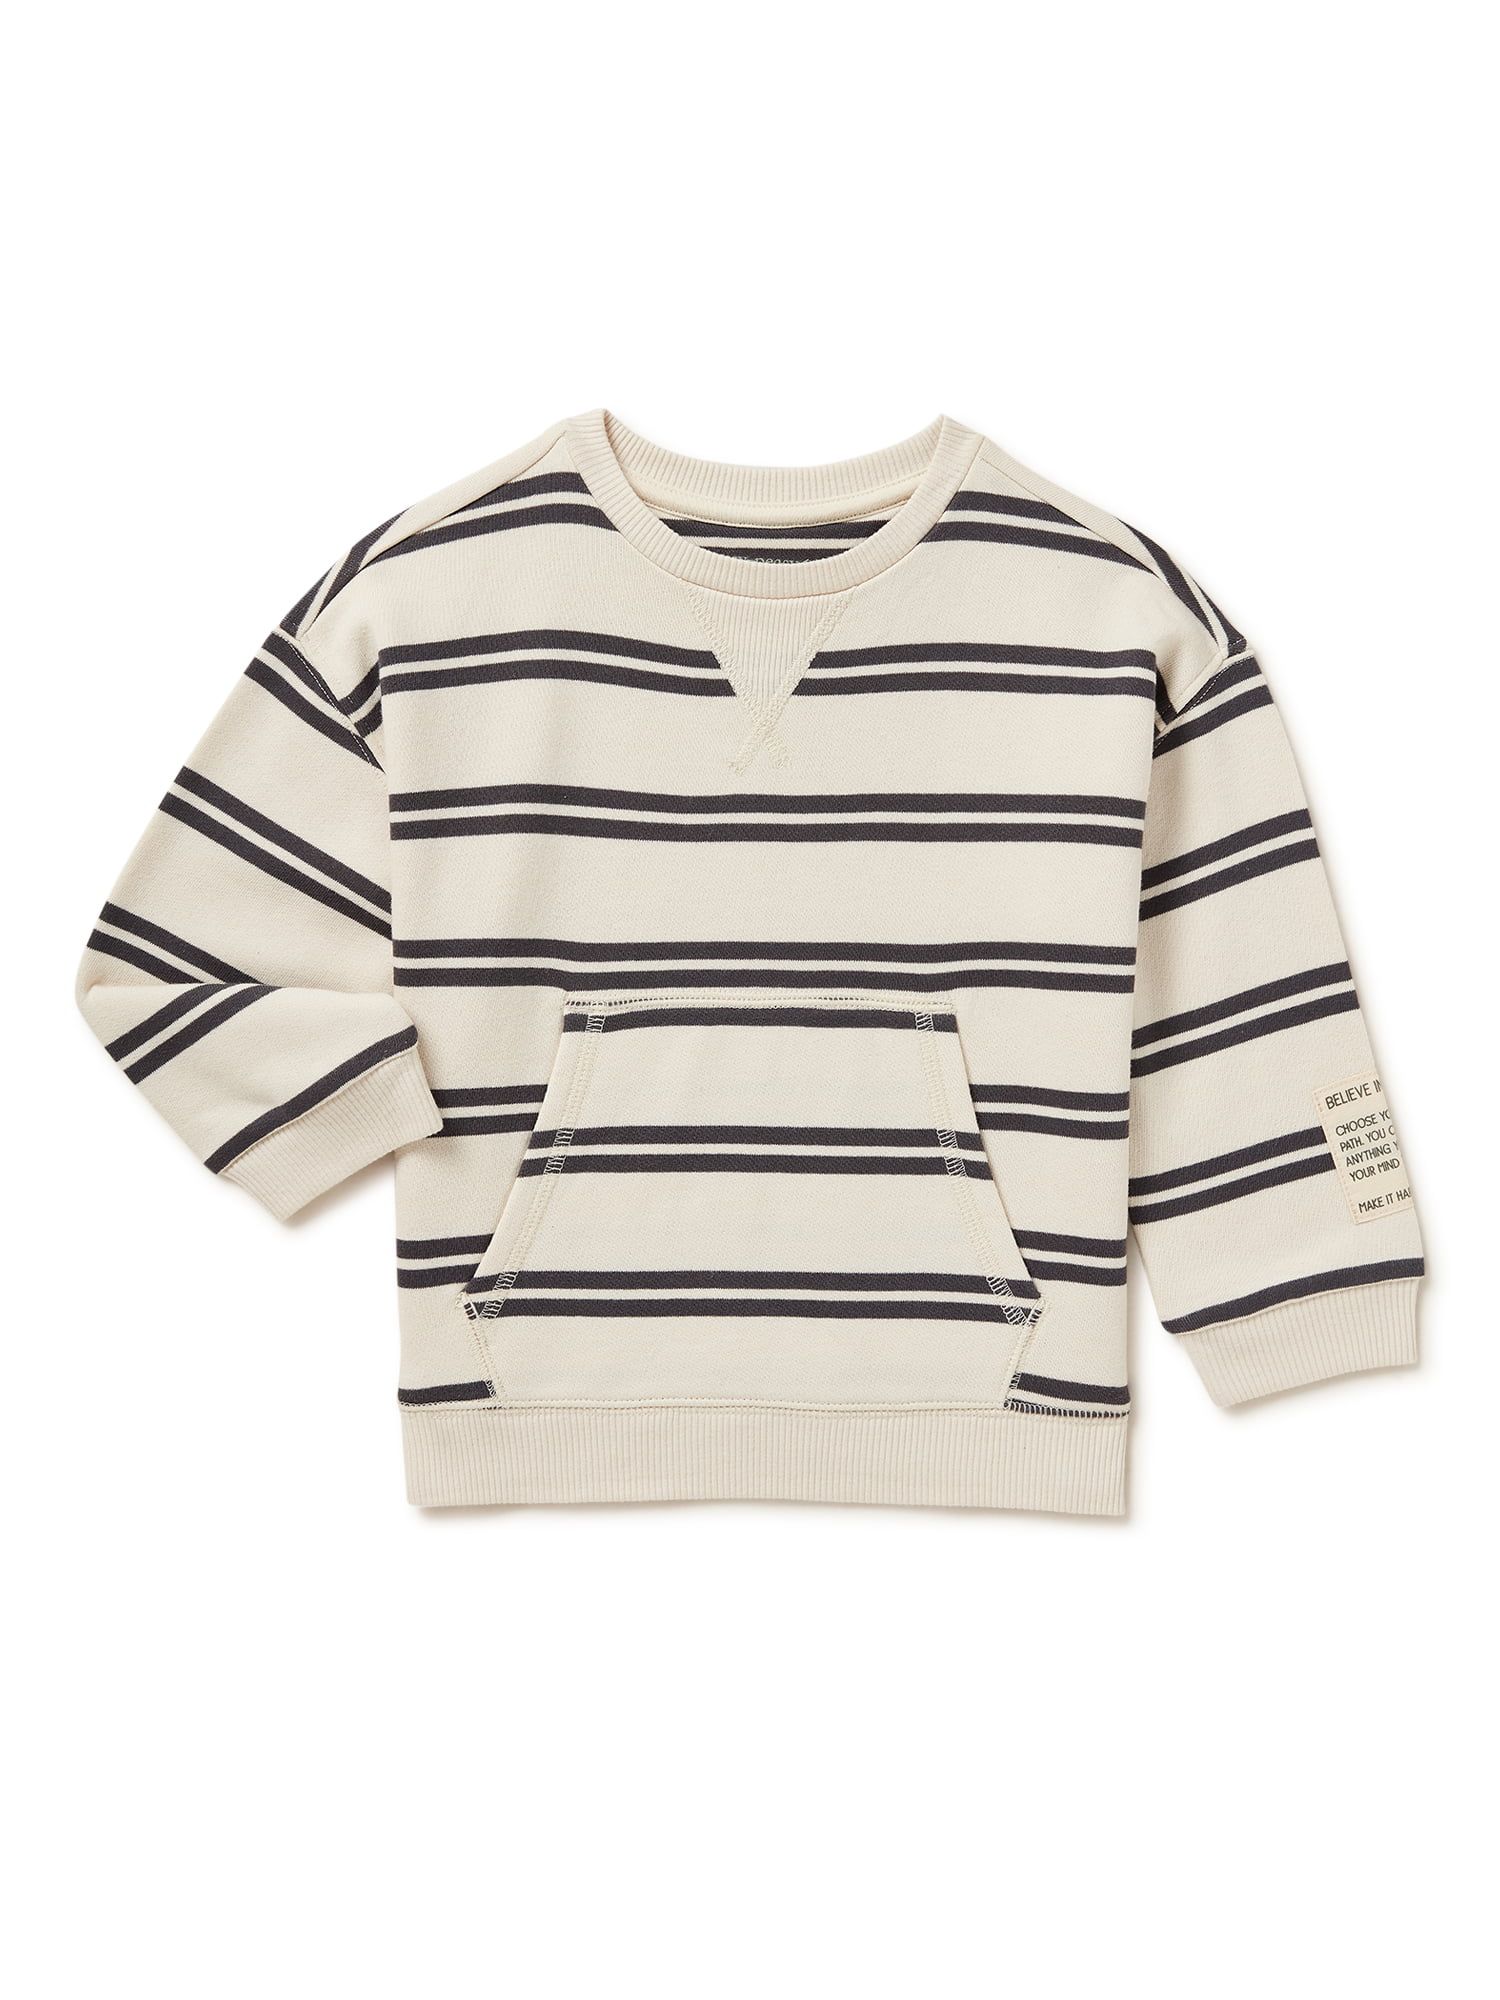 easy-peasy Baby and Toddler Boys French Terrycloth Pullover, Sizes 12M-5T | Walmart (US)